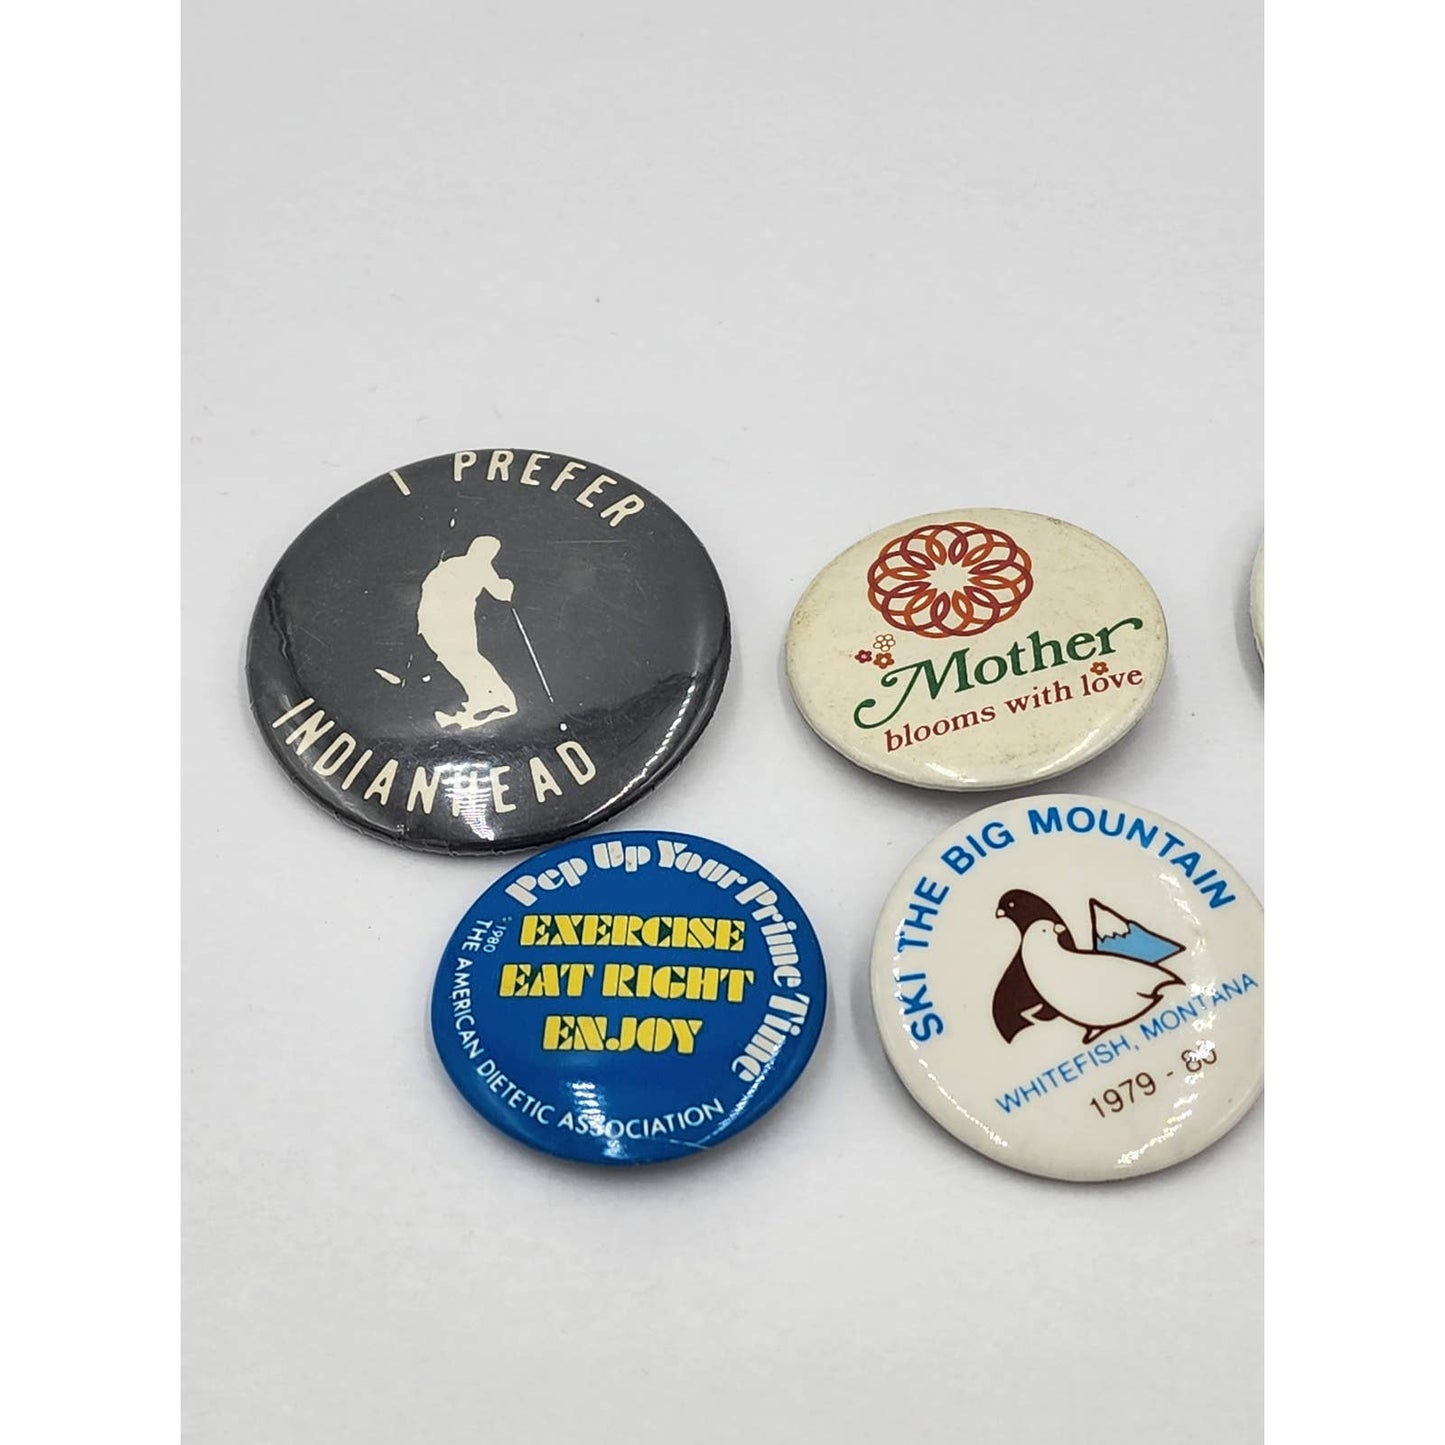 Vintage Buttons Lot 7 Praise Lord IndianHead Therapy Big Mountain Pins Pinback